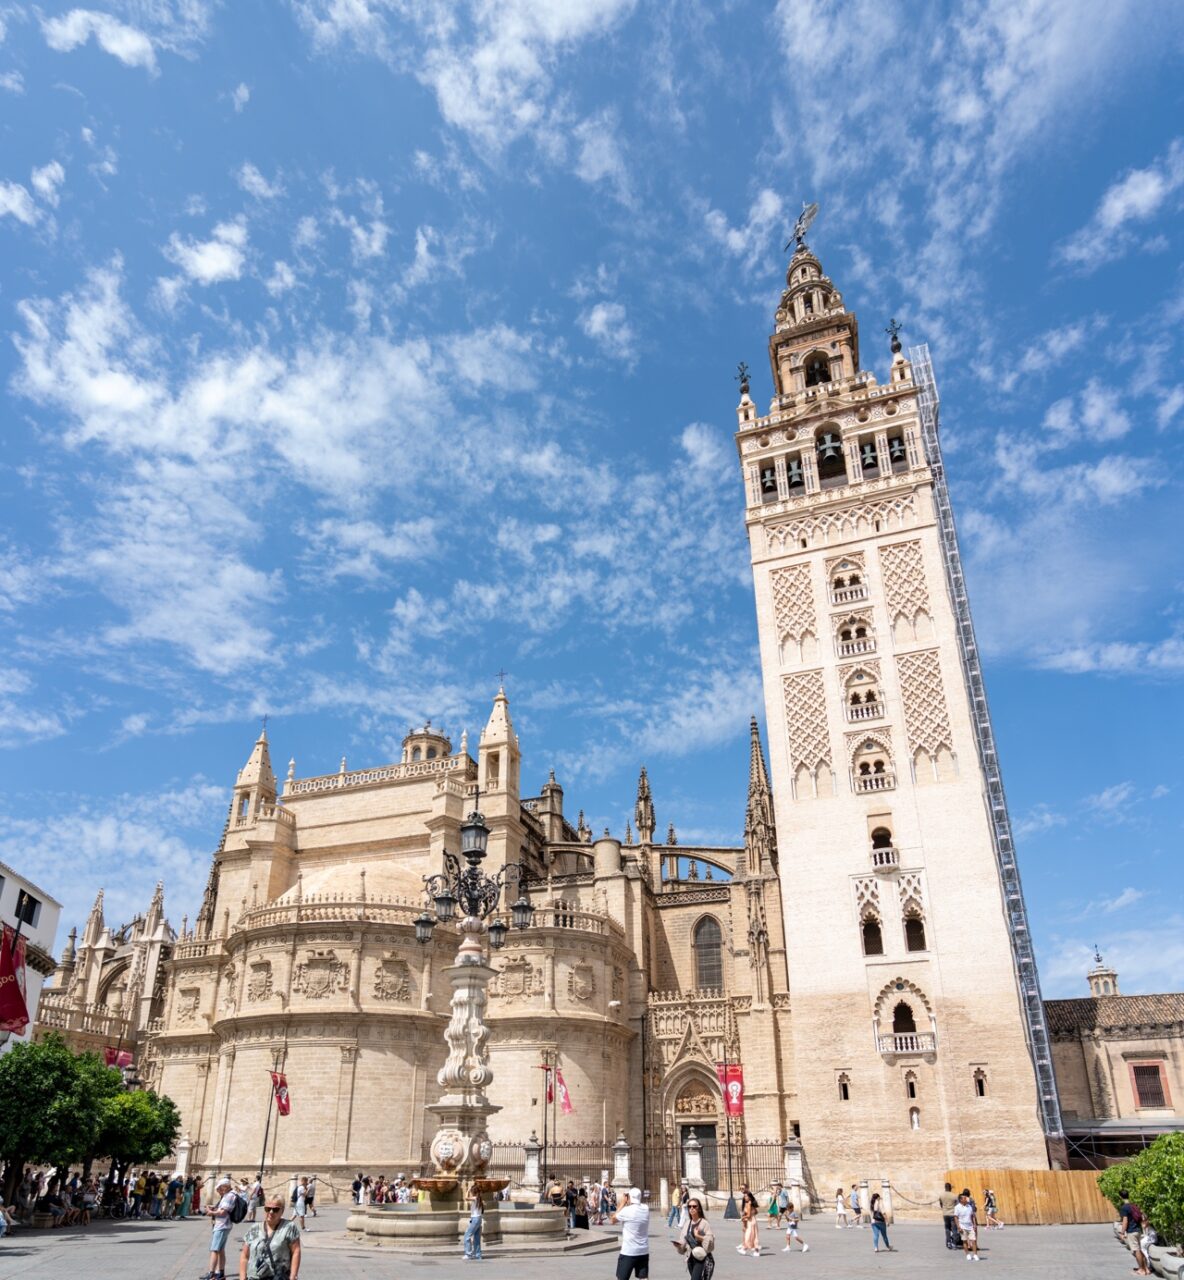 Seville Cathedral and Giralda Tower, Spain Largest Gothic cathedral in Europe